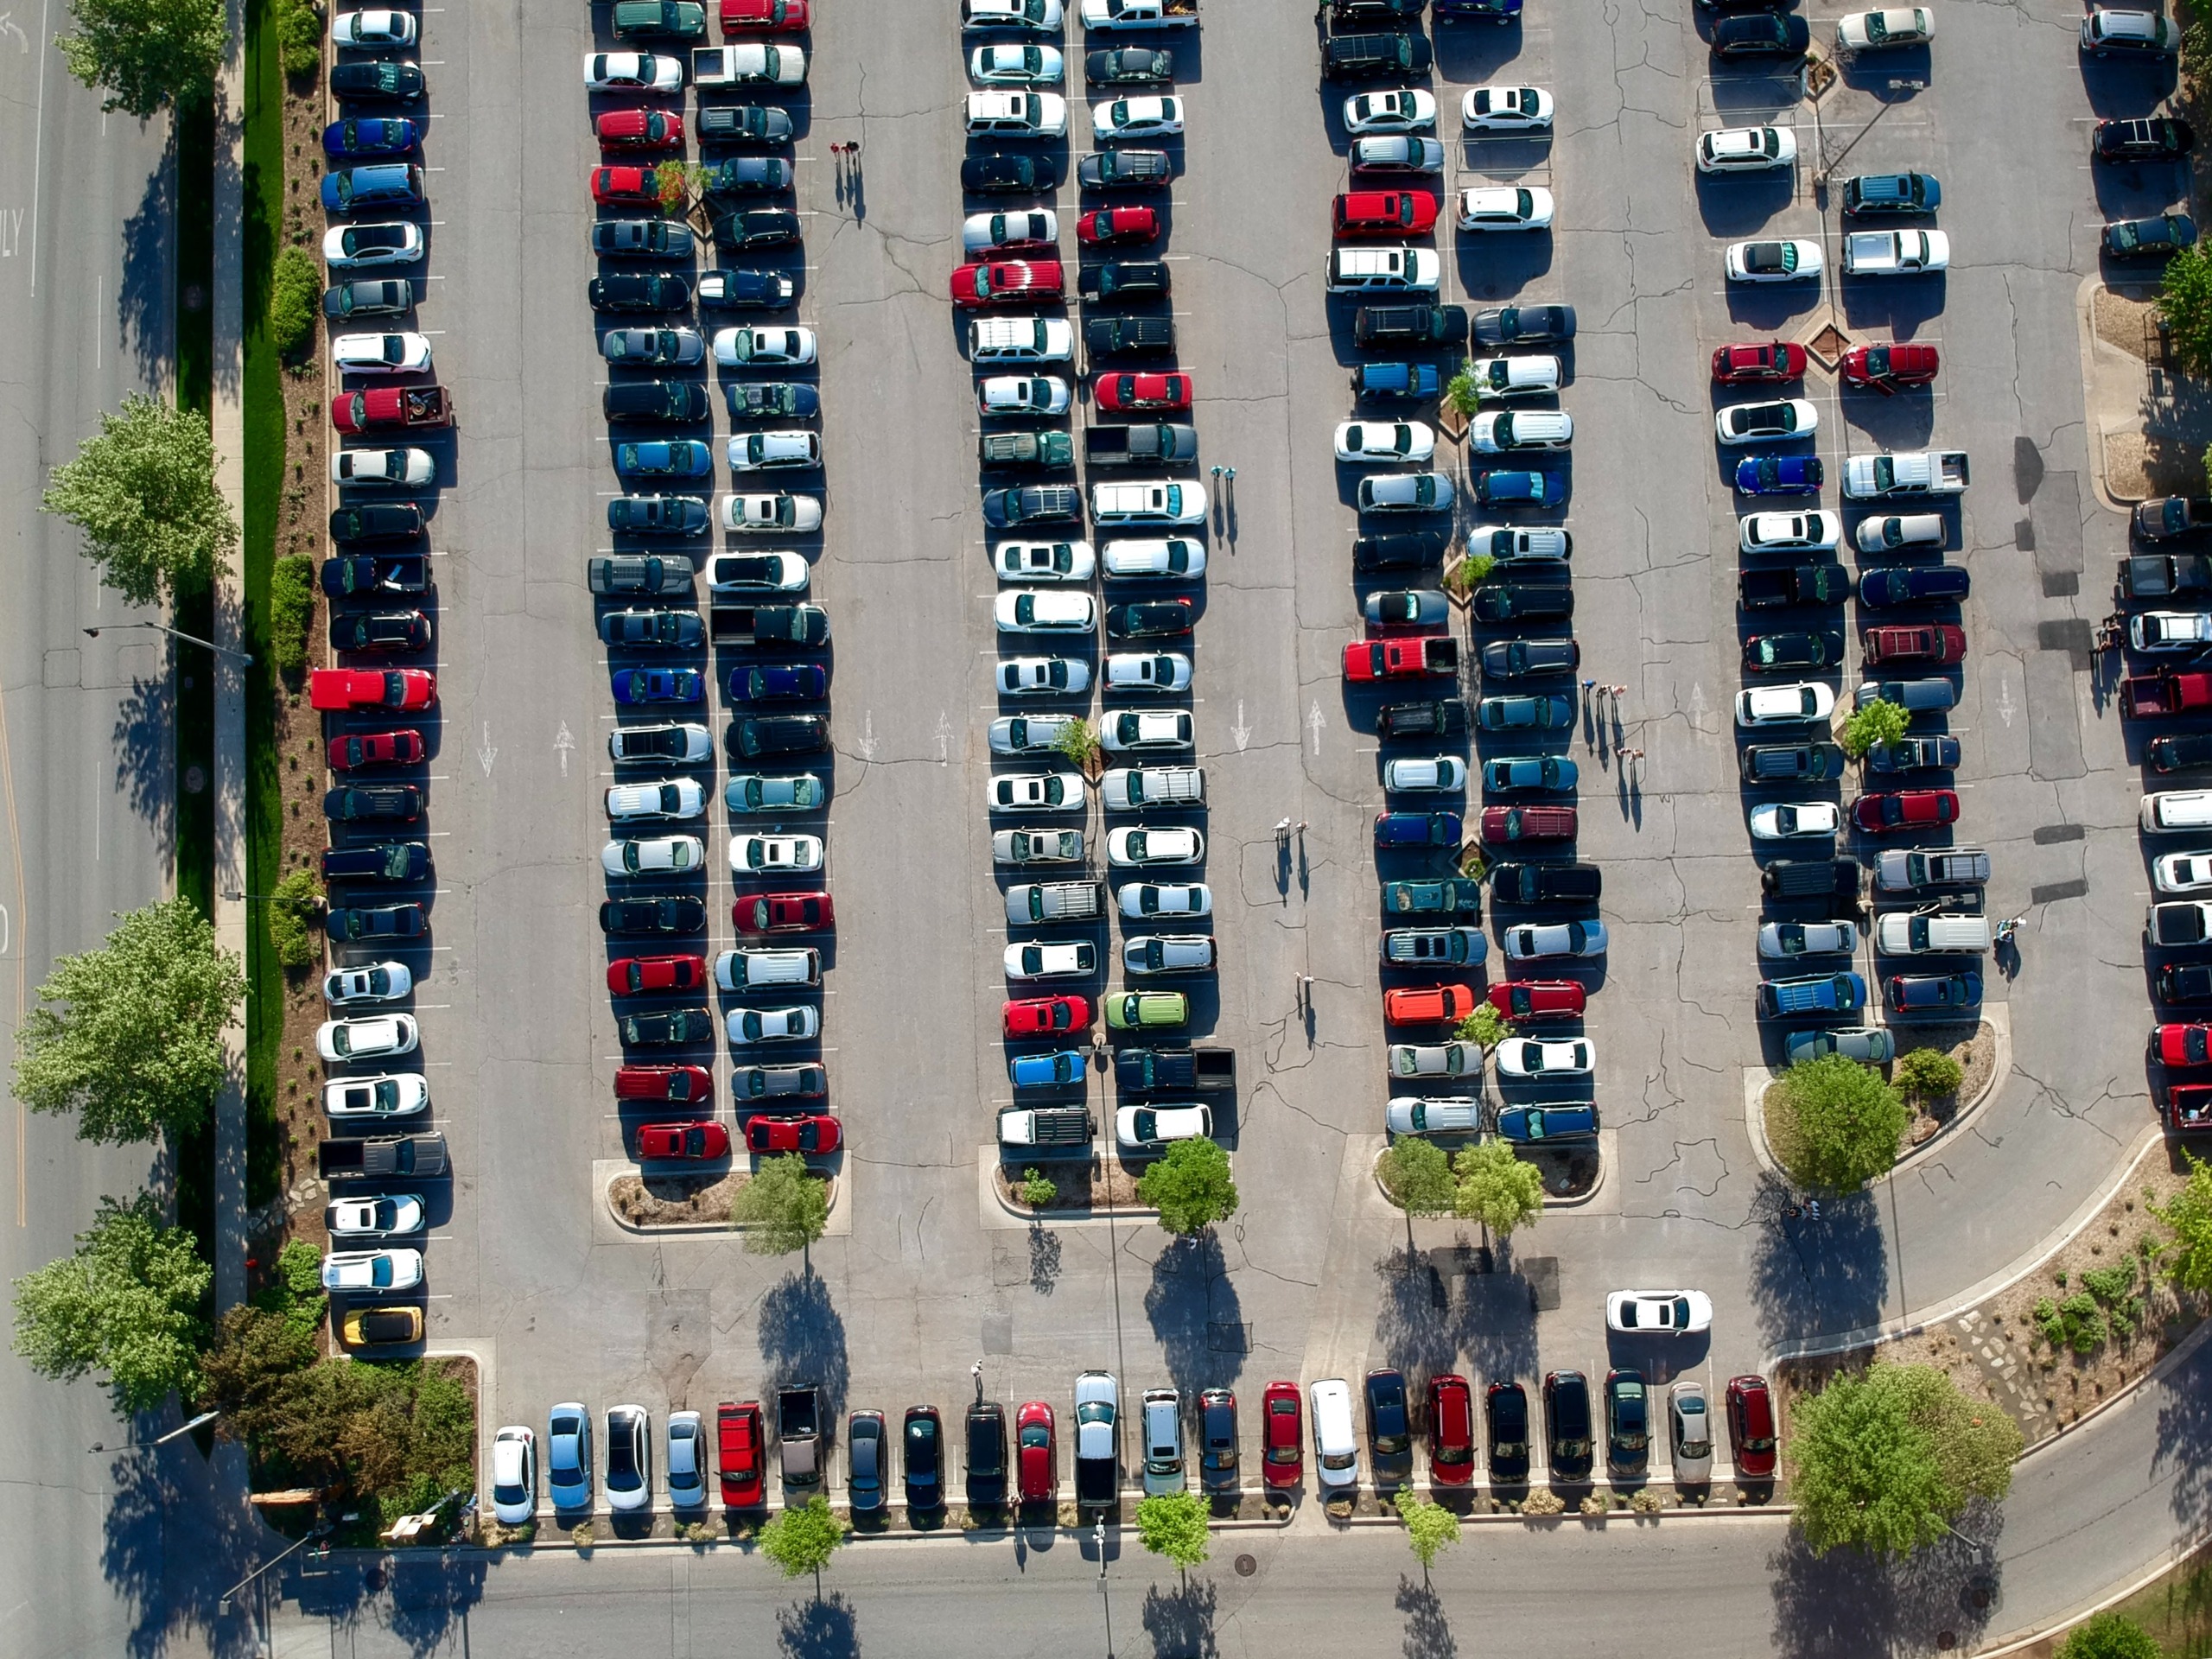 Leveling the Playing Field: How Digital Parking Solutions Are Rethinking Equity and Inclusion